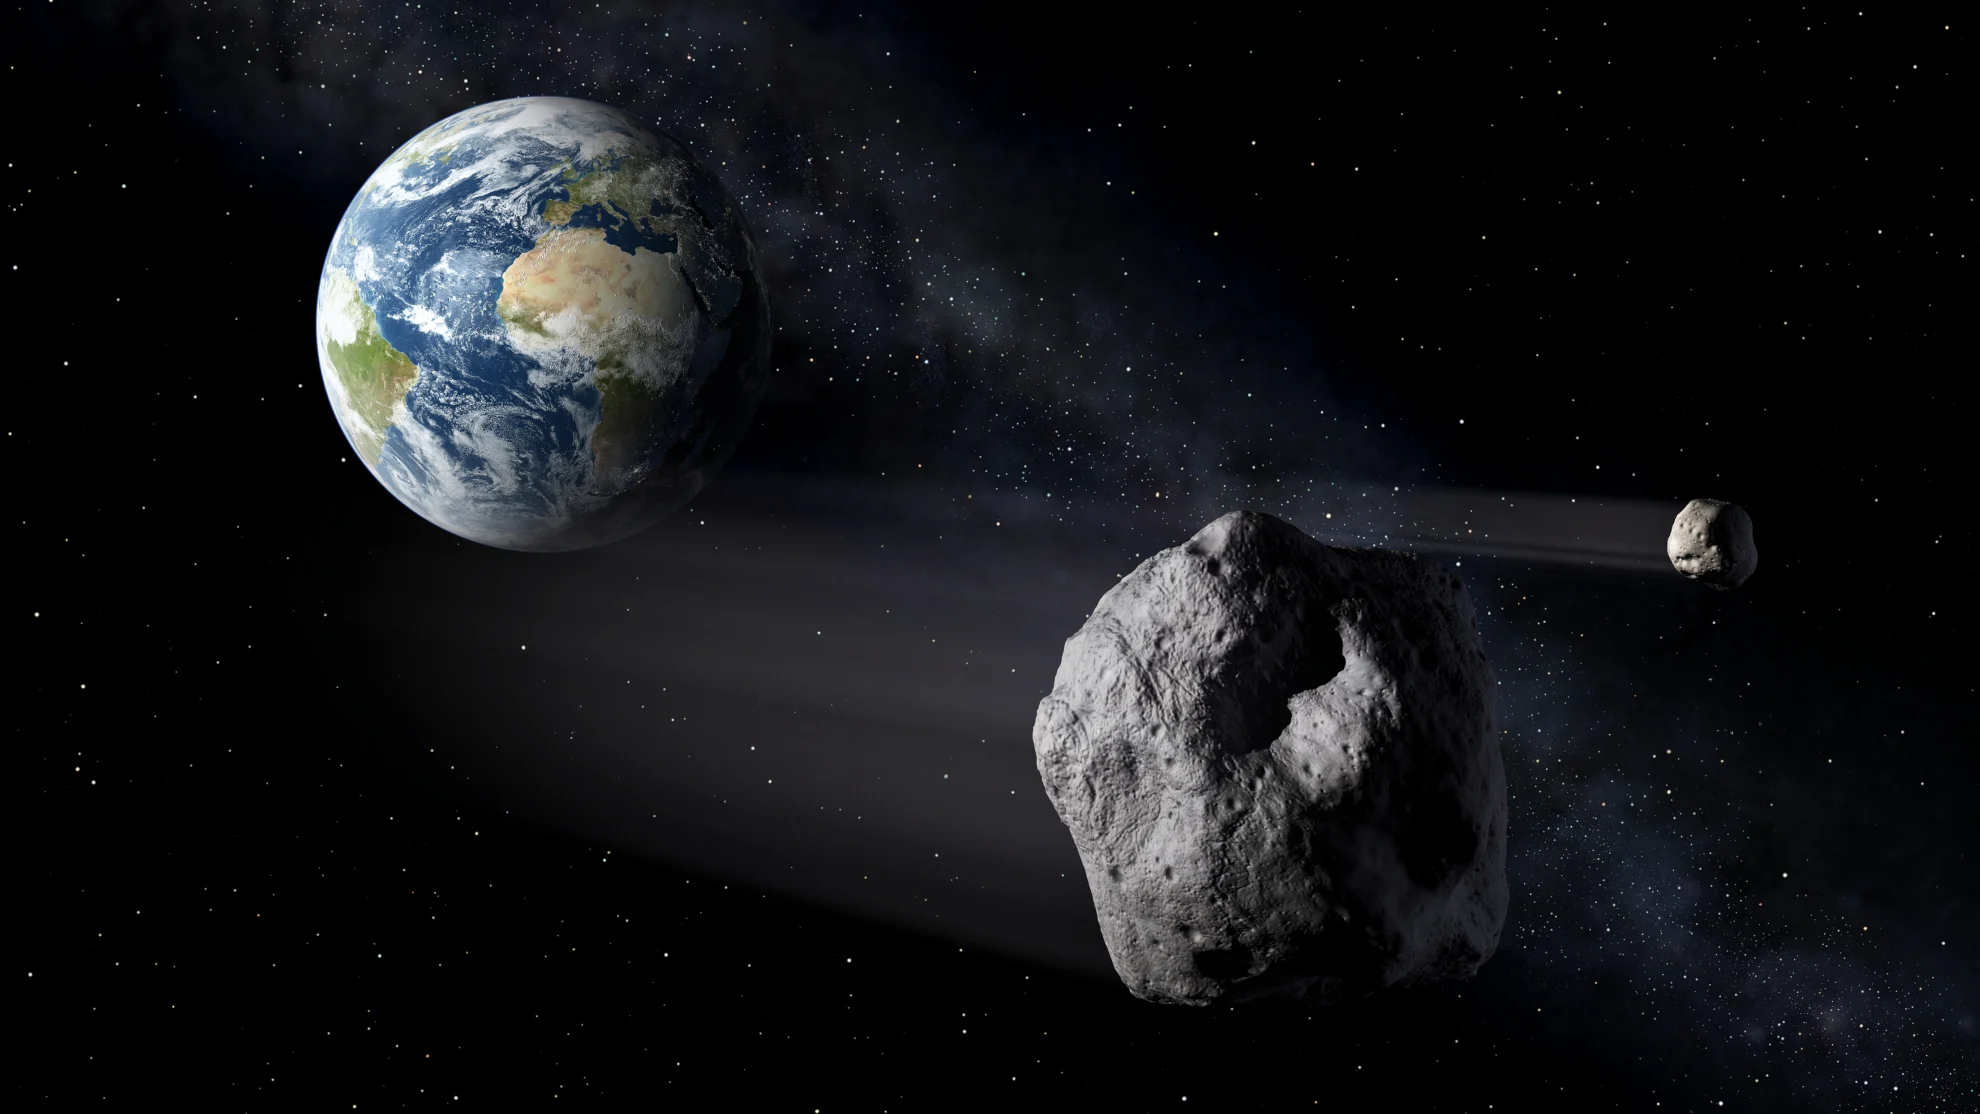 Two massive asteroids swing past Earth this week. Should we worry about a collision? Answer, here